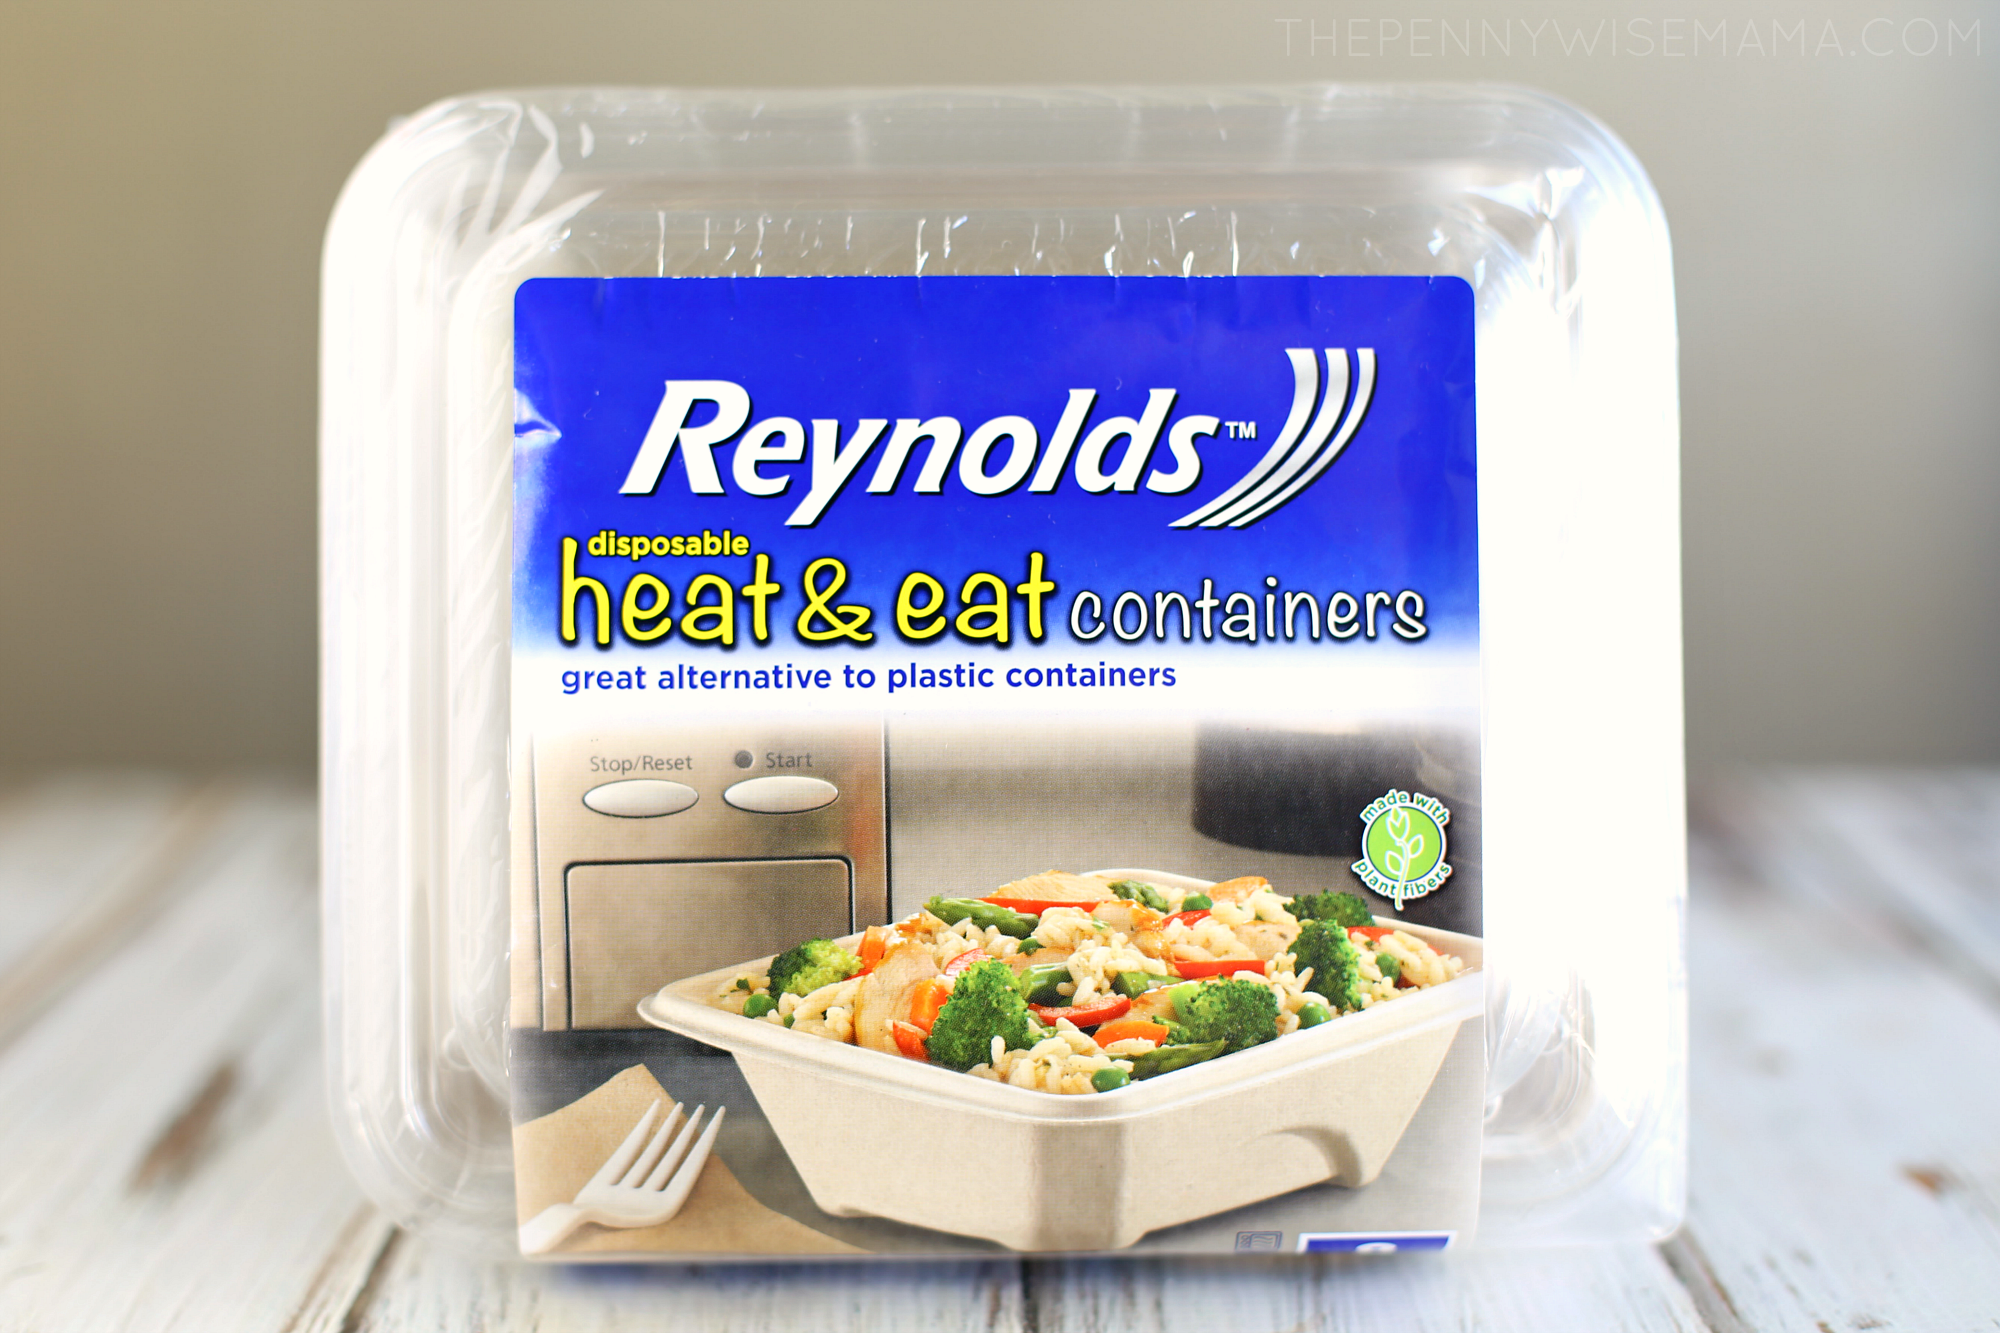 Reynolds Disposable Heat & Eat Containers